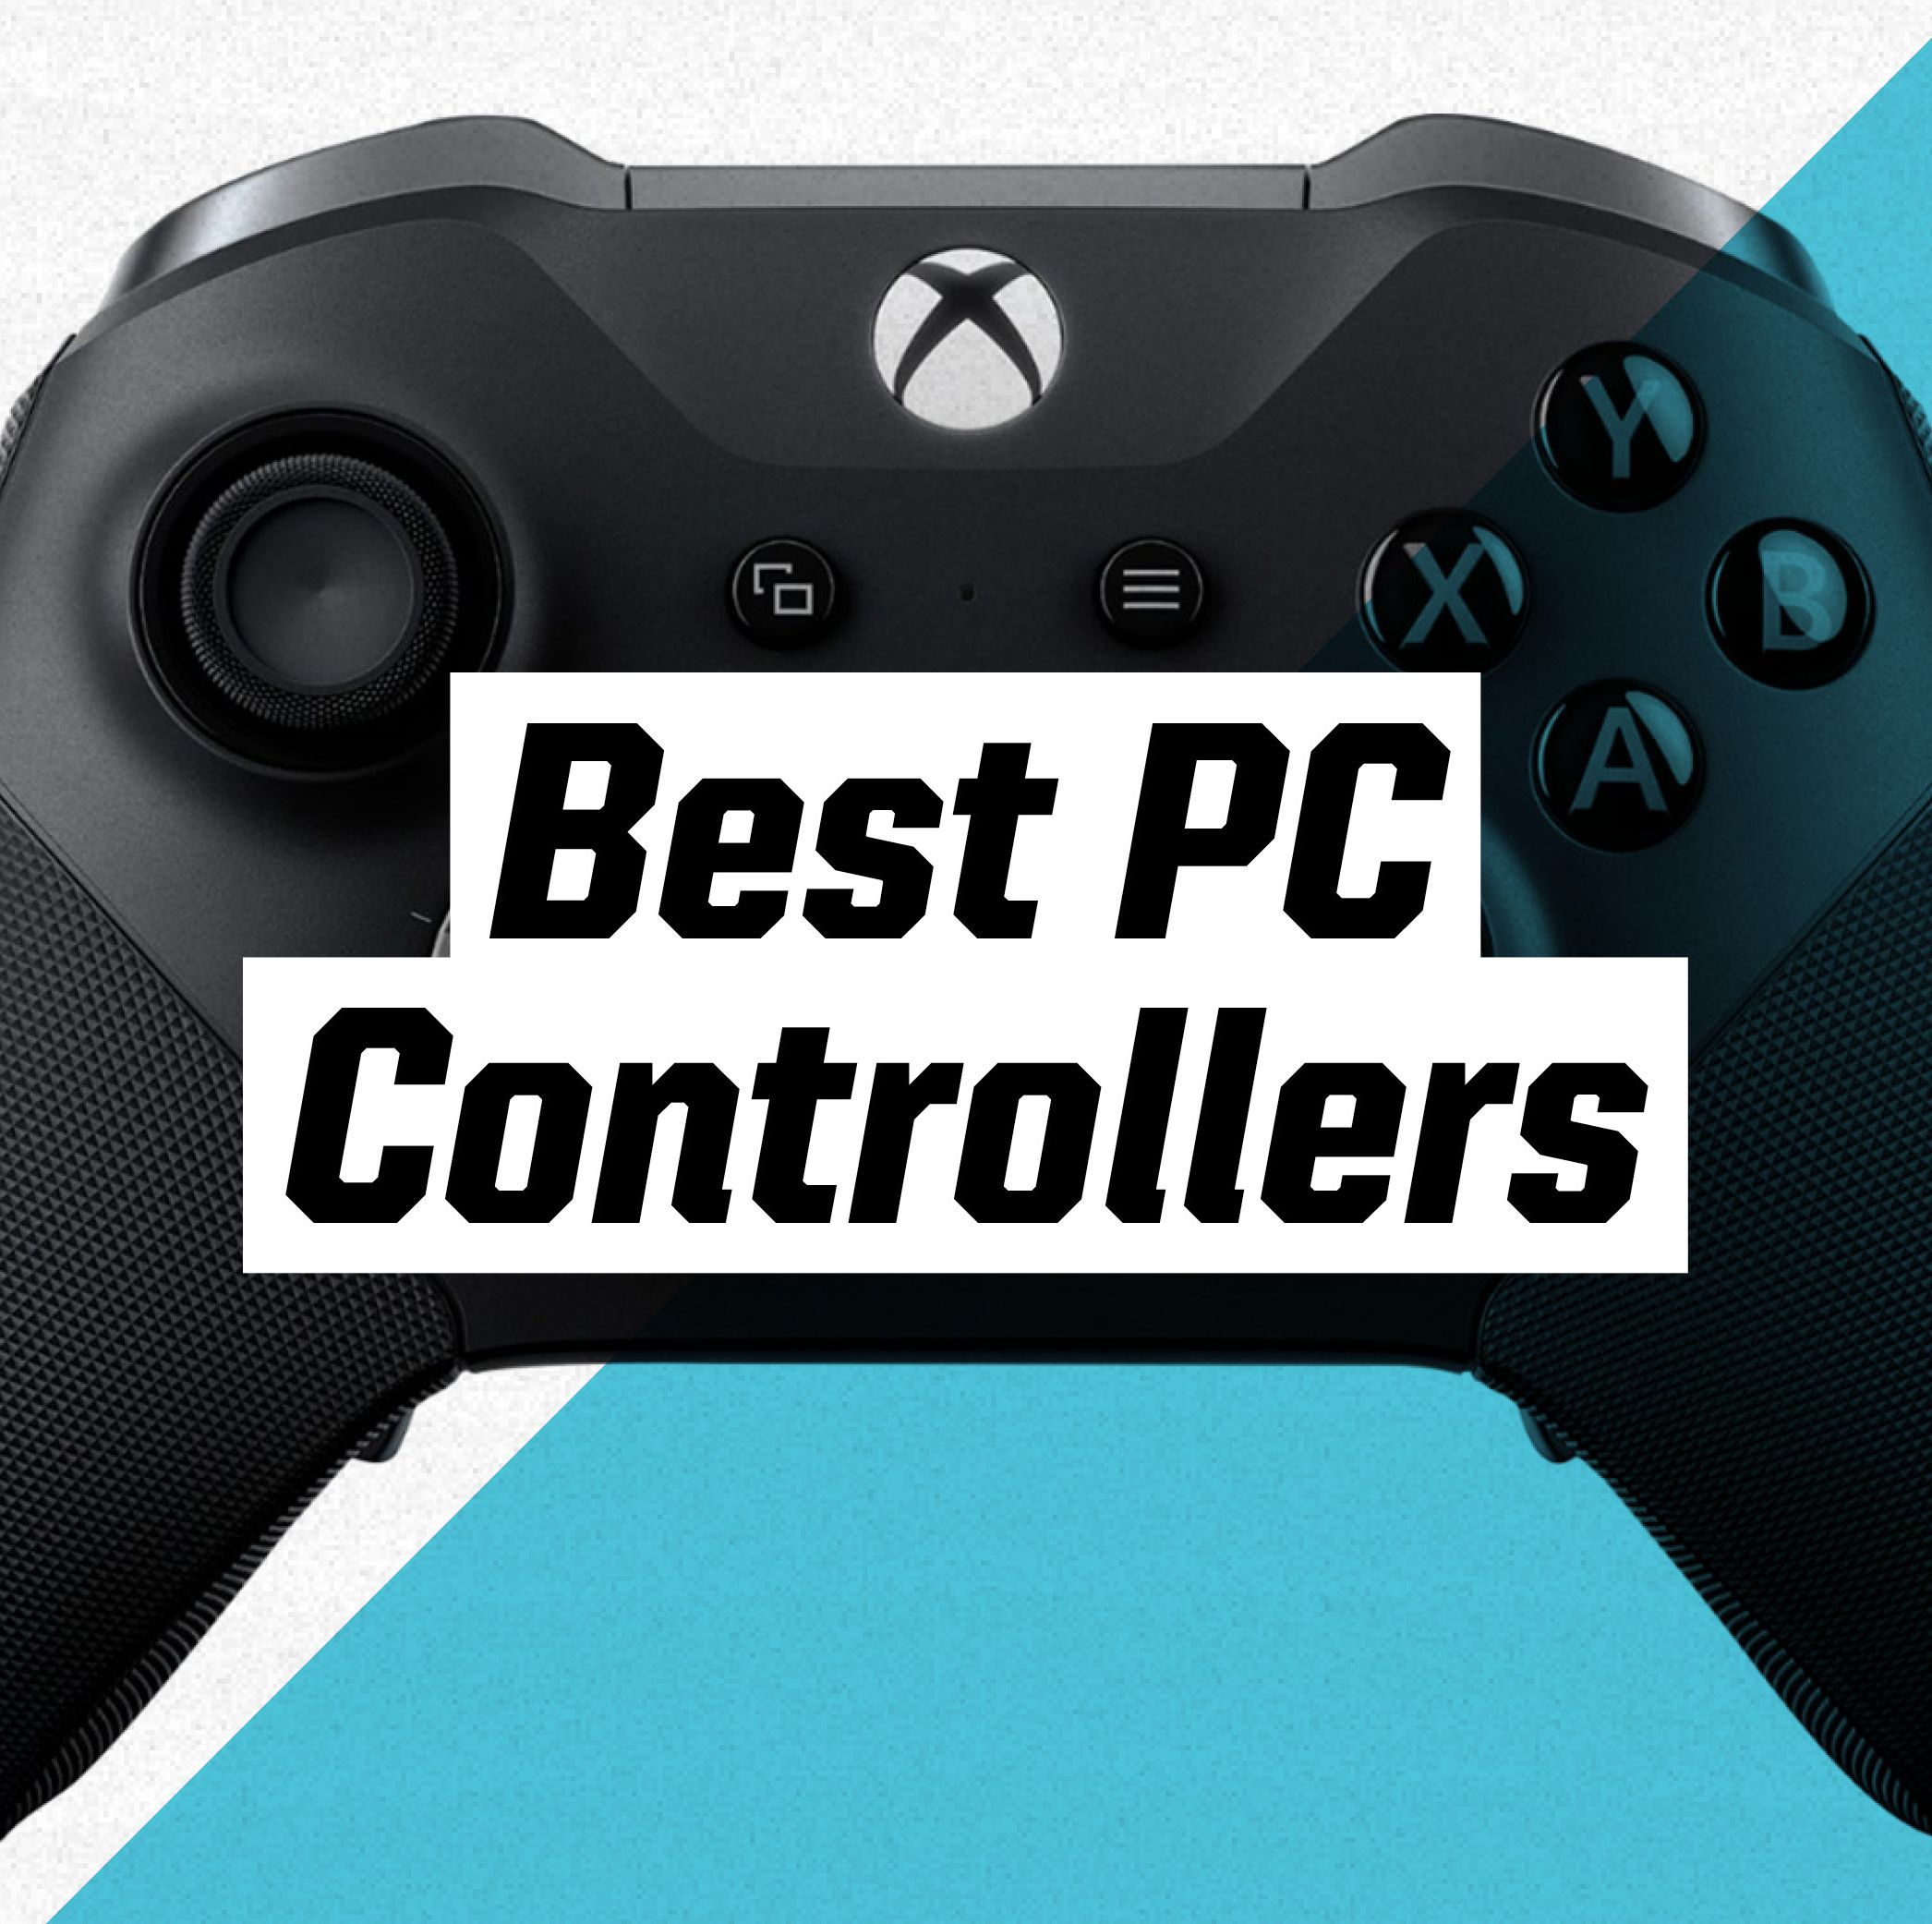 The Best PC Controllers for Gaming